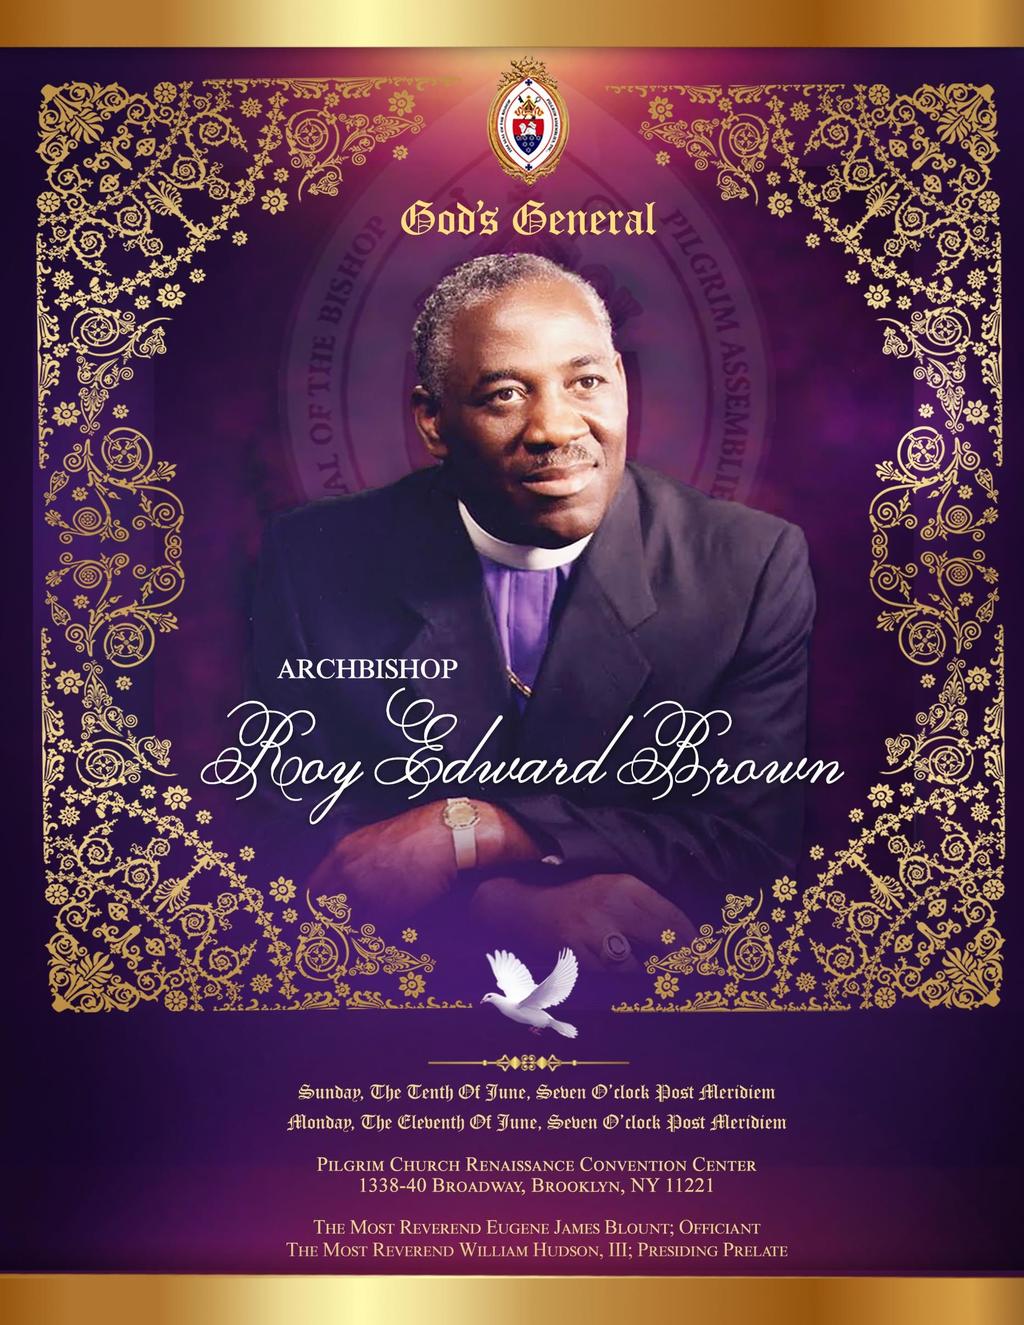 (Front Cover) Celebration of Life For ARCHBISOP ROY EDWARD BROWN (Photo in Clergy purple shirt) SUNDAY, THE TENTH OF JUNE, SEVEN O CLOCK POST MERIDIEM MONDAY, THE ELEVENTH OF JUNE, SEVEN O CLOCK